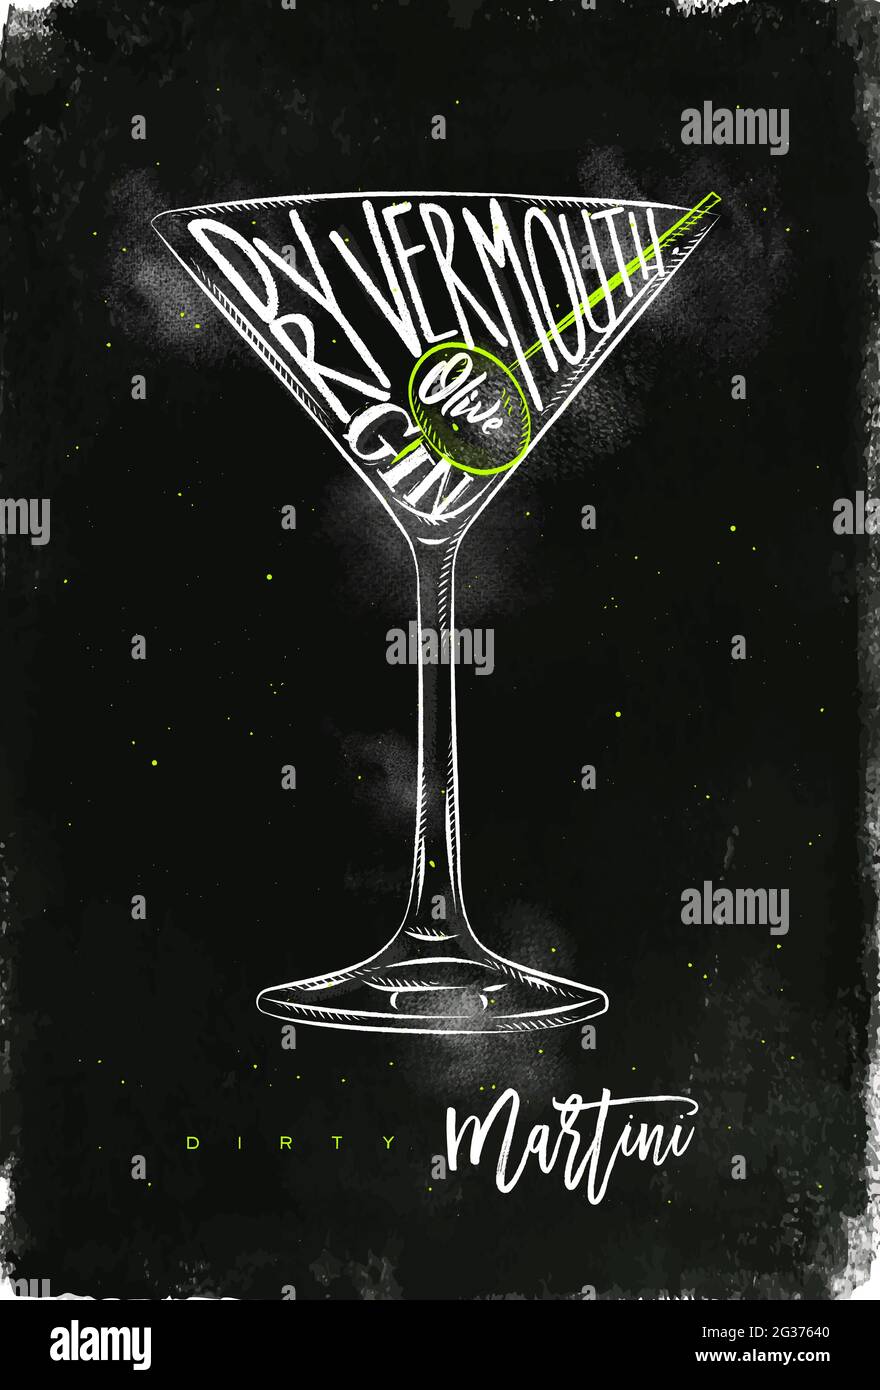 Dirty martini cocktail lettering dry vermouth, gin, olive in vintage graphic style drawing with chalk and color on chalkboard background Stock Vector